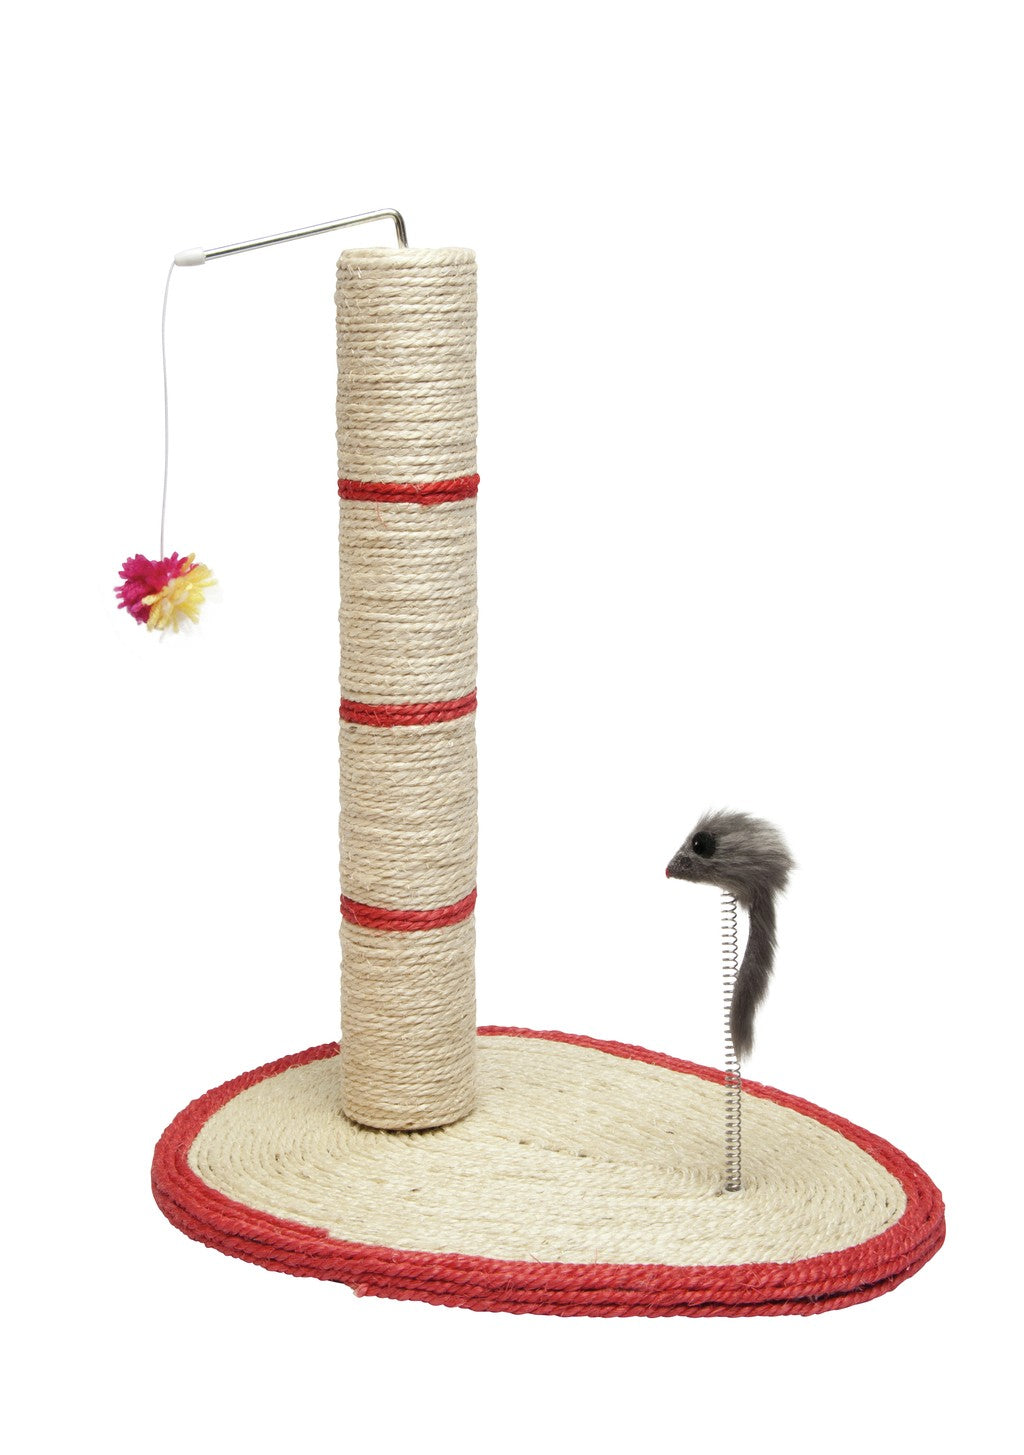 Camon Scratching Post with Oval Base